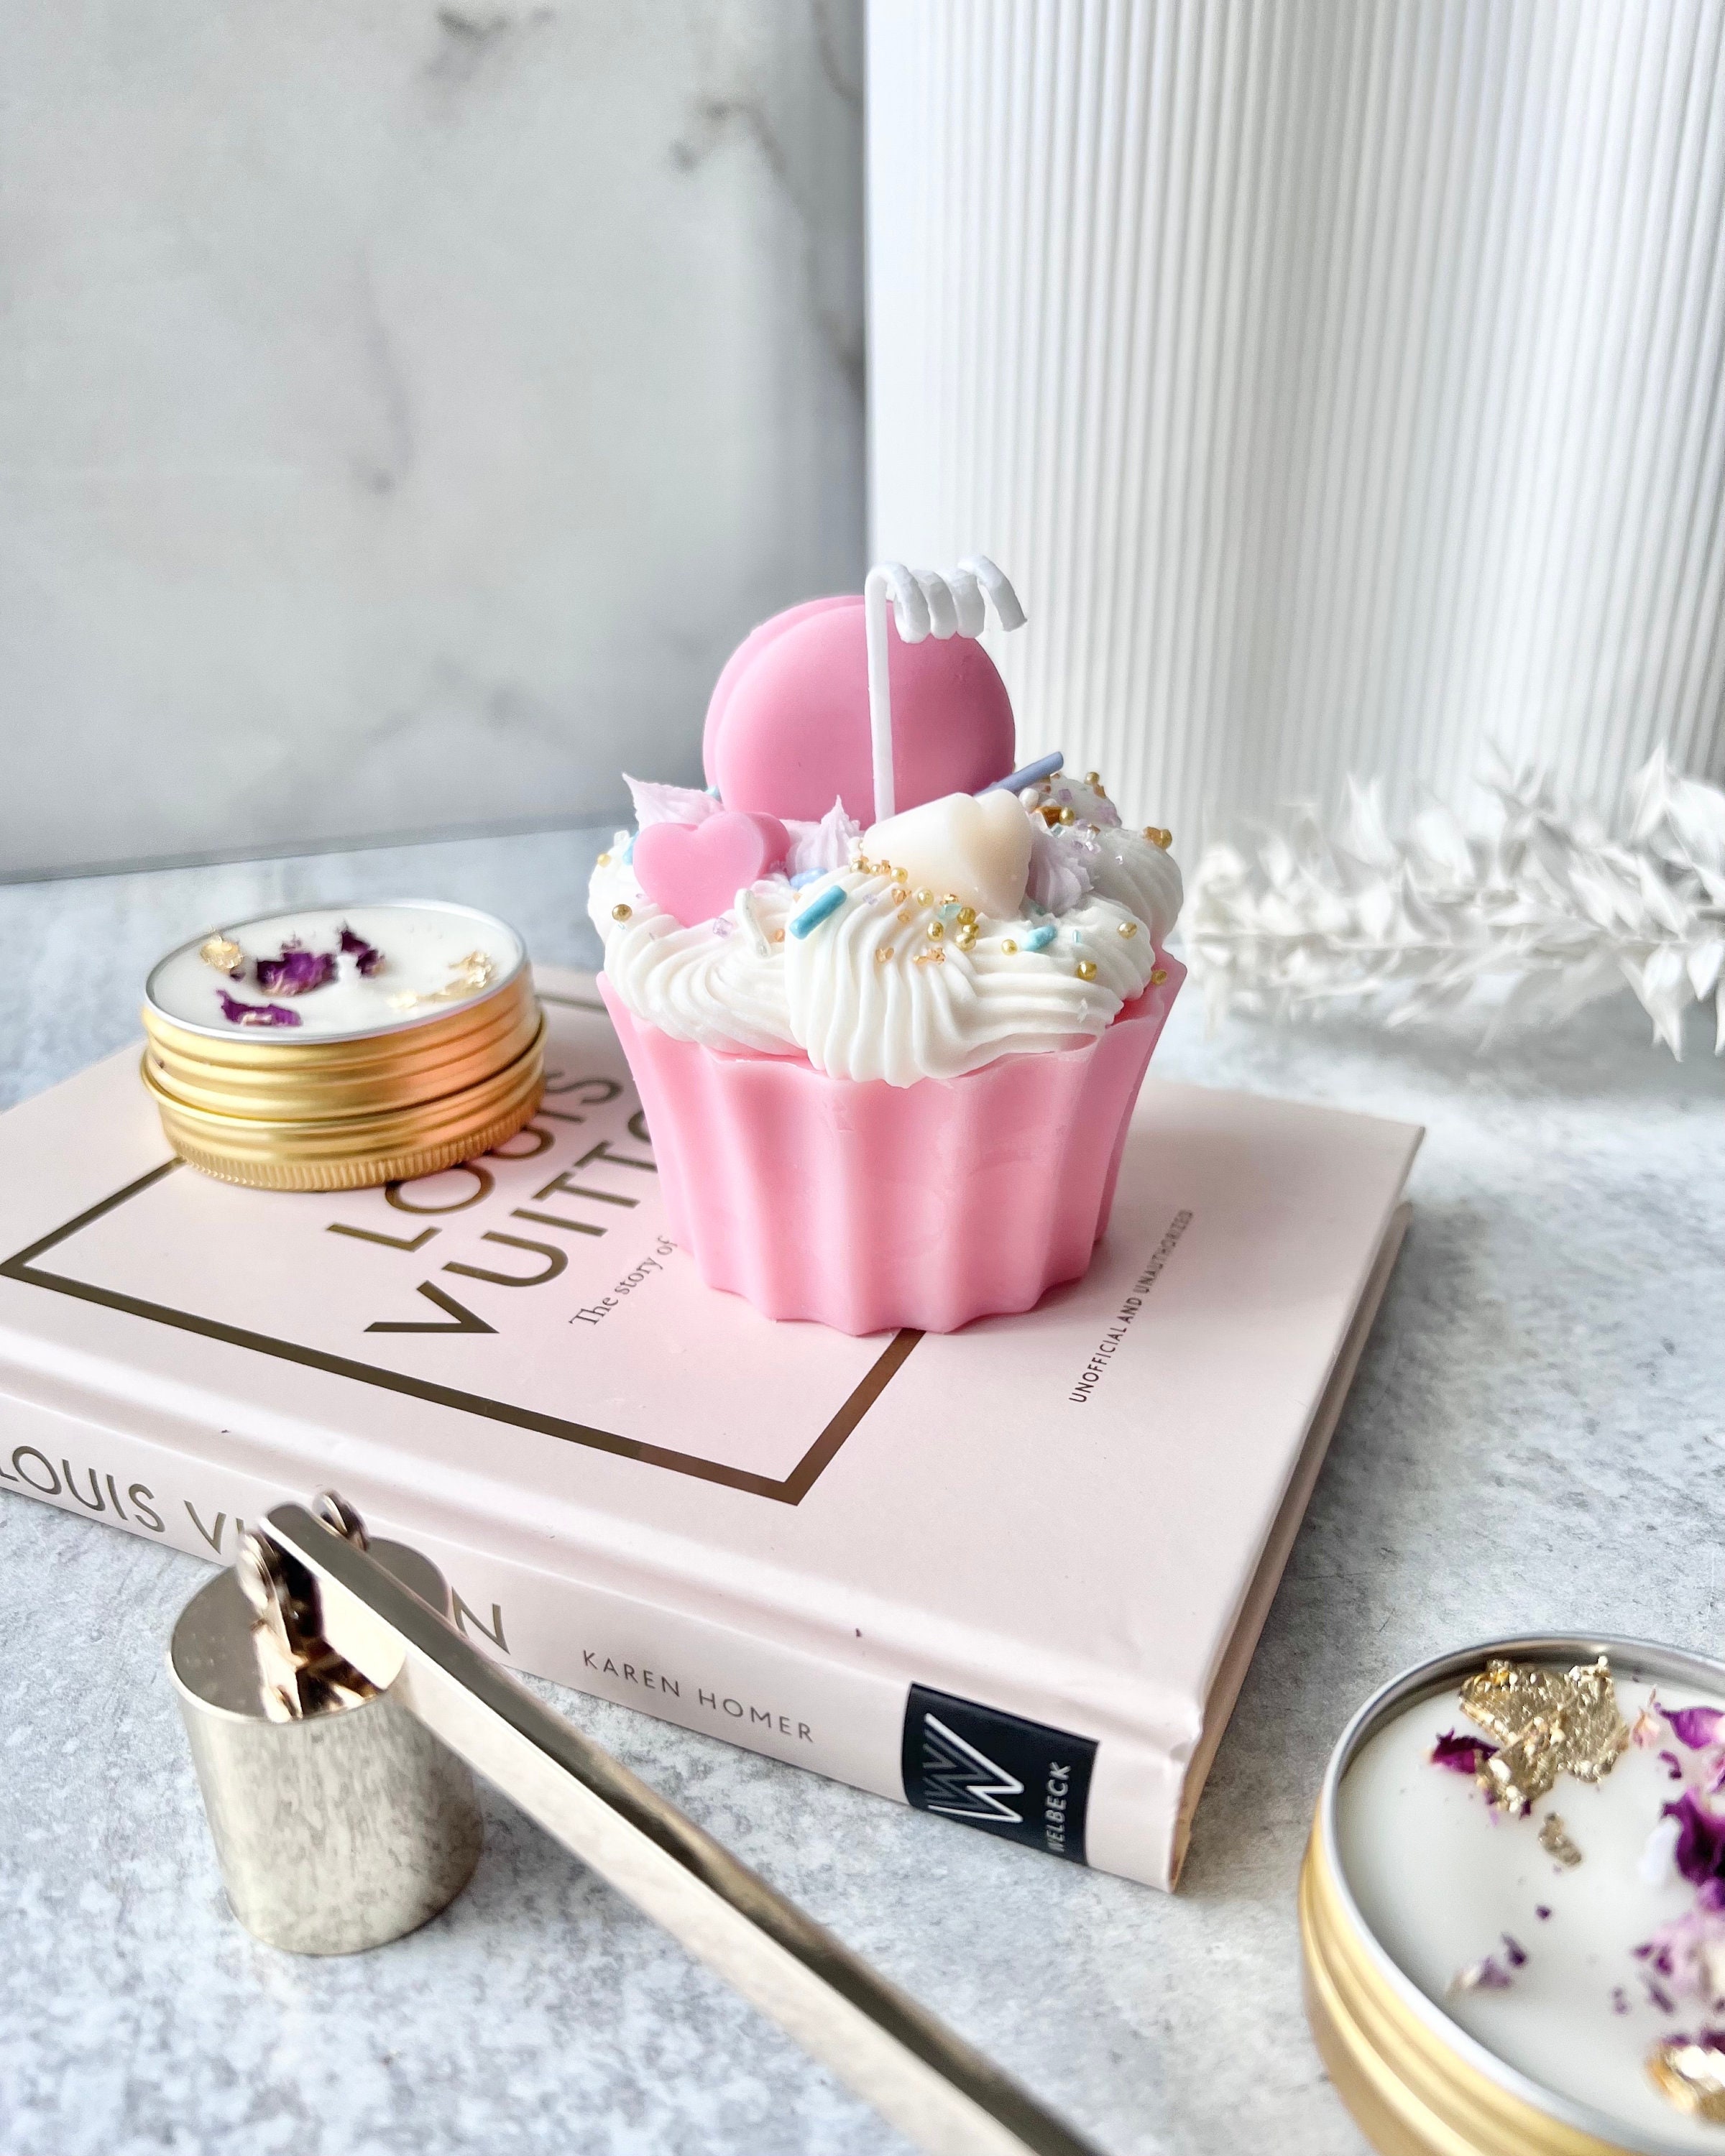 Cupcake Candle Birthday Cake Scented Natural Pillar Soy Wax 